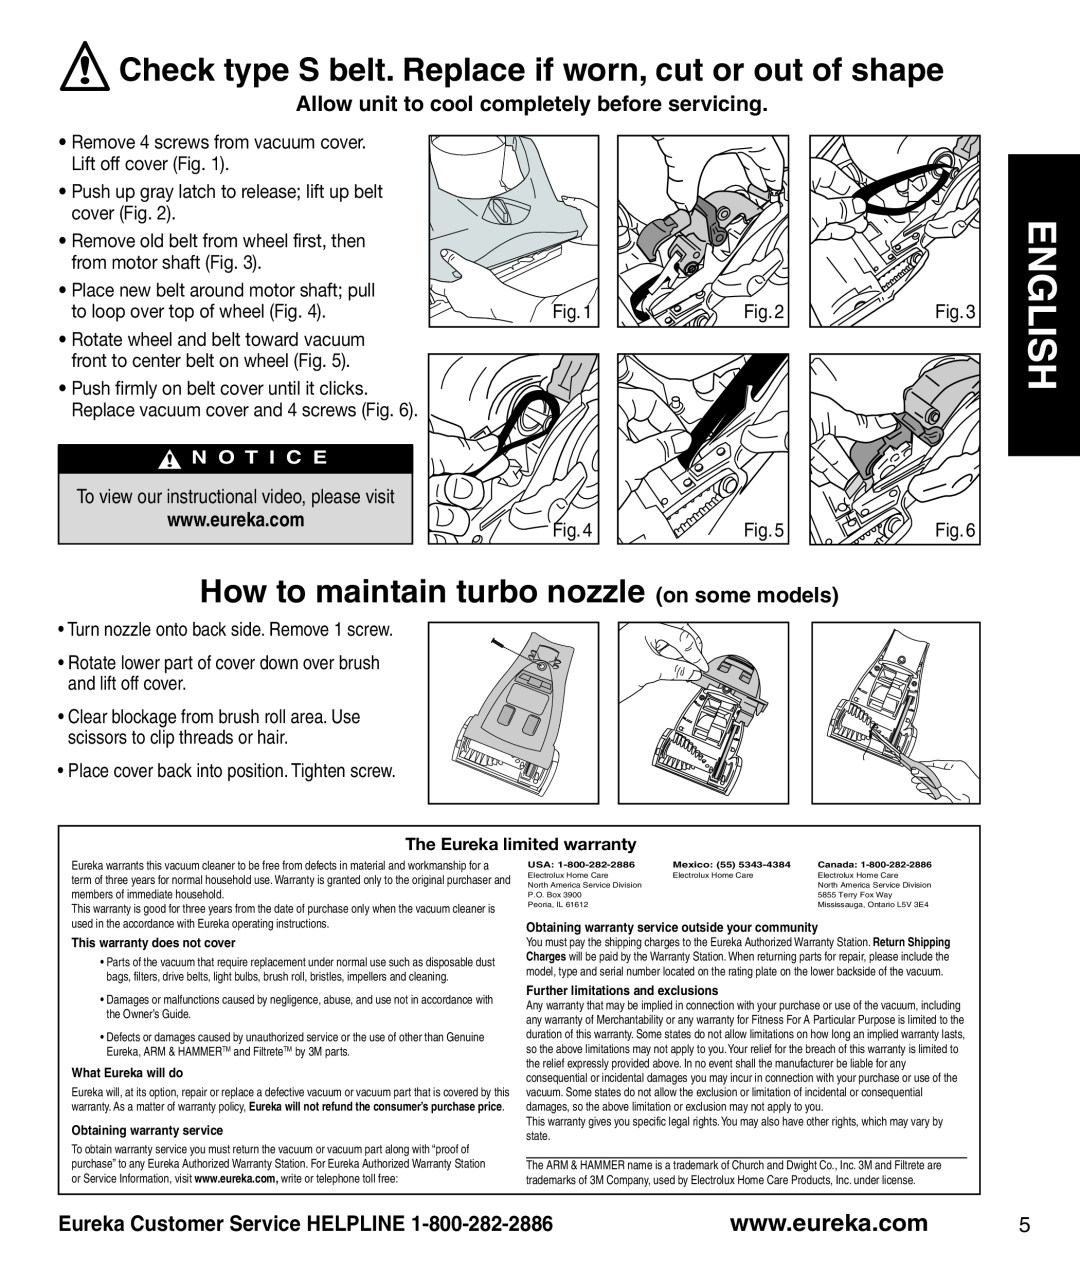 Eureka AS1001A manual Allow unit to cool completely before servicing, English, How to maintain turbo nozzle on some models 